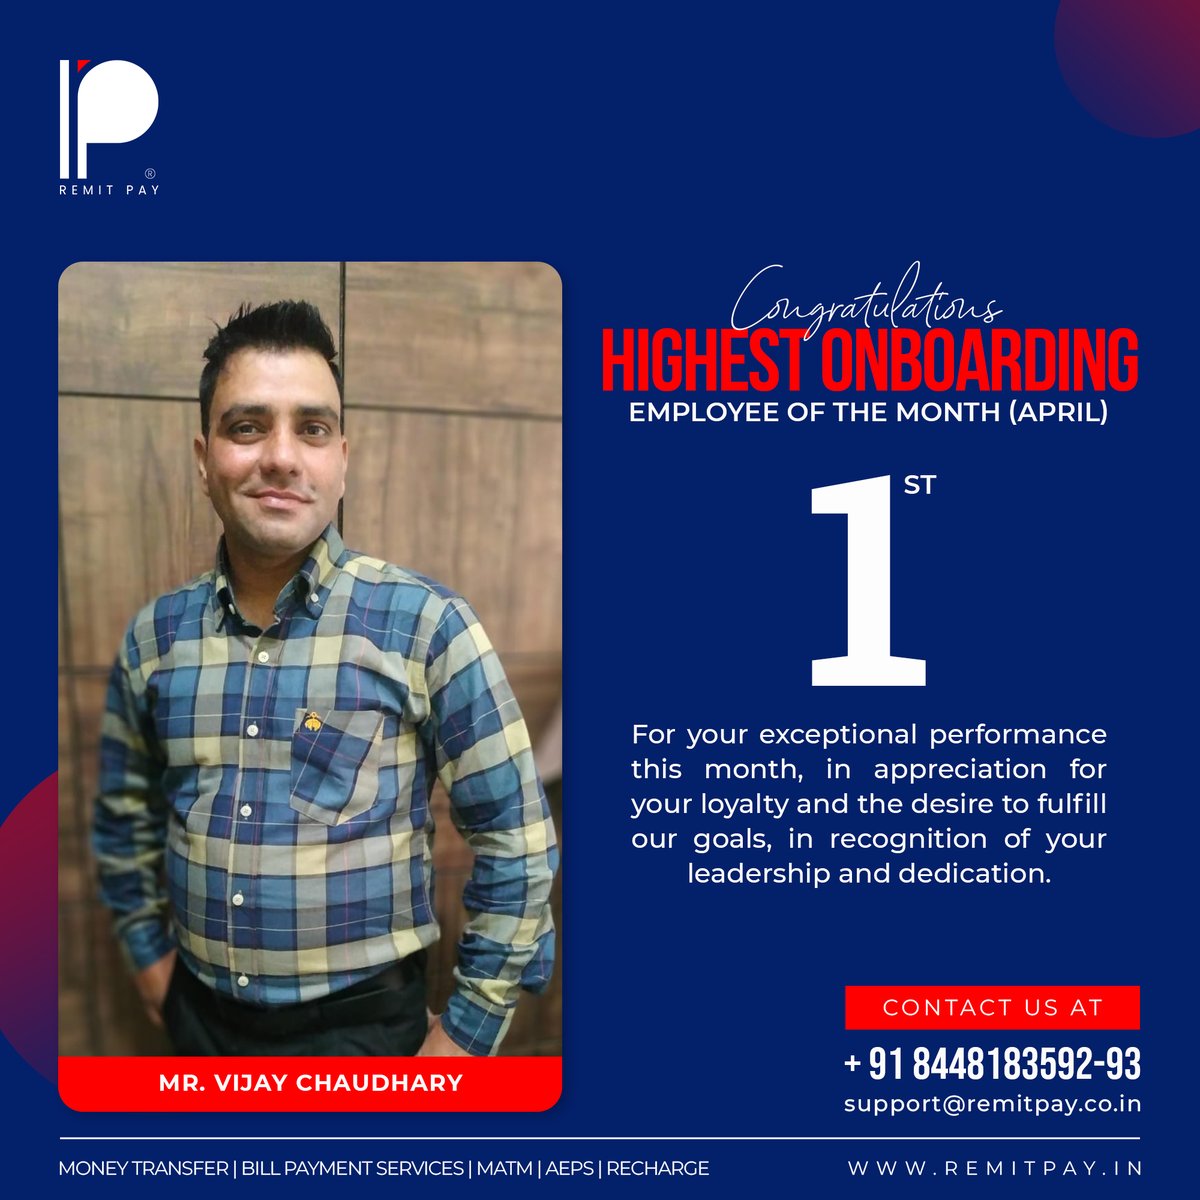 Highest Onboarding_Rank 1: Employee of the month (April)

Congratulations Mr. Vijay Chaudhary!

#financialservice #financialservices #fintech #fintechs #fintechstartup #fintechsolutions #fintechrevolution #employeeofthemonth #employee #employeeofthemonth #employeerecognition